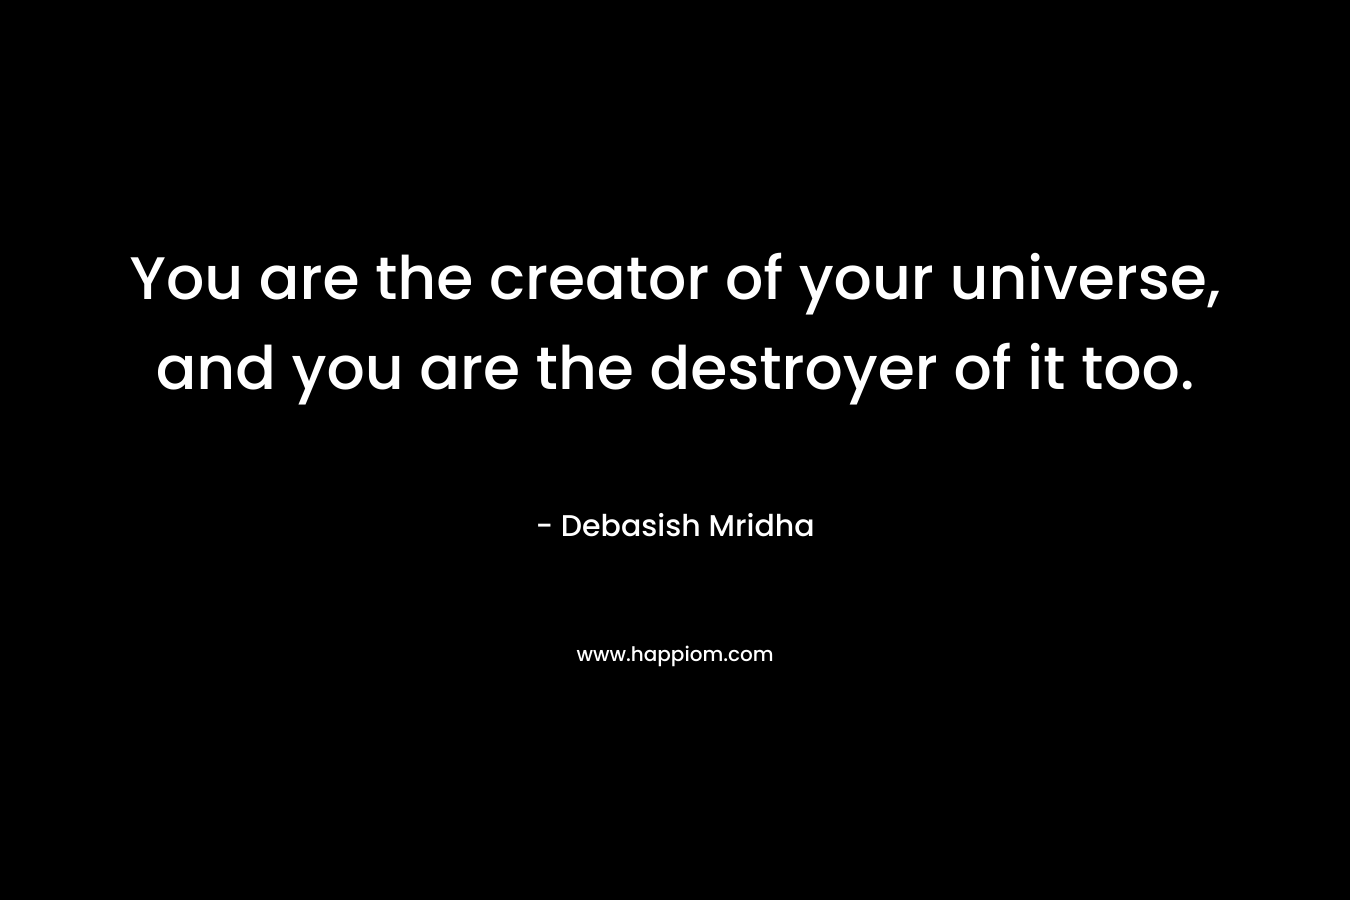 You are the creator of your universe, and you are the destroyer of it too. – Debasish Mridha